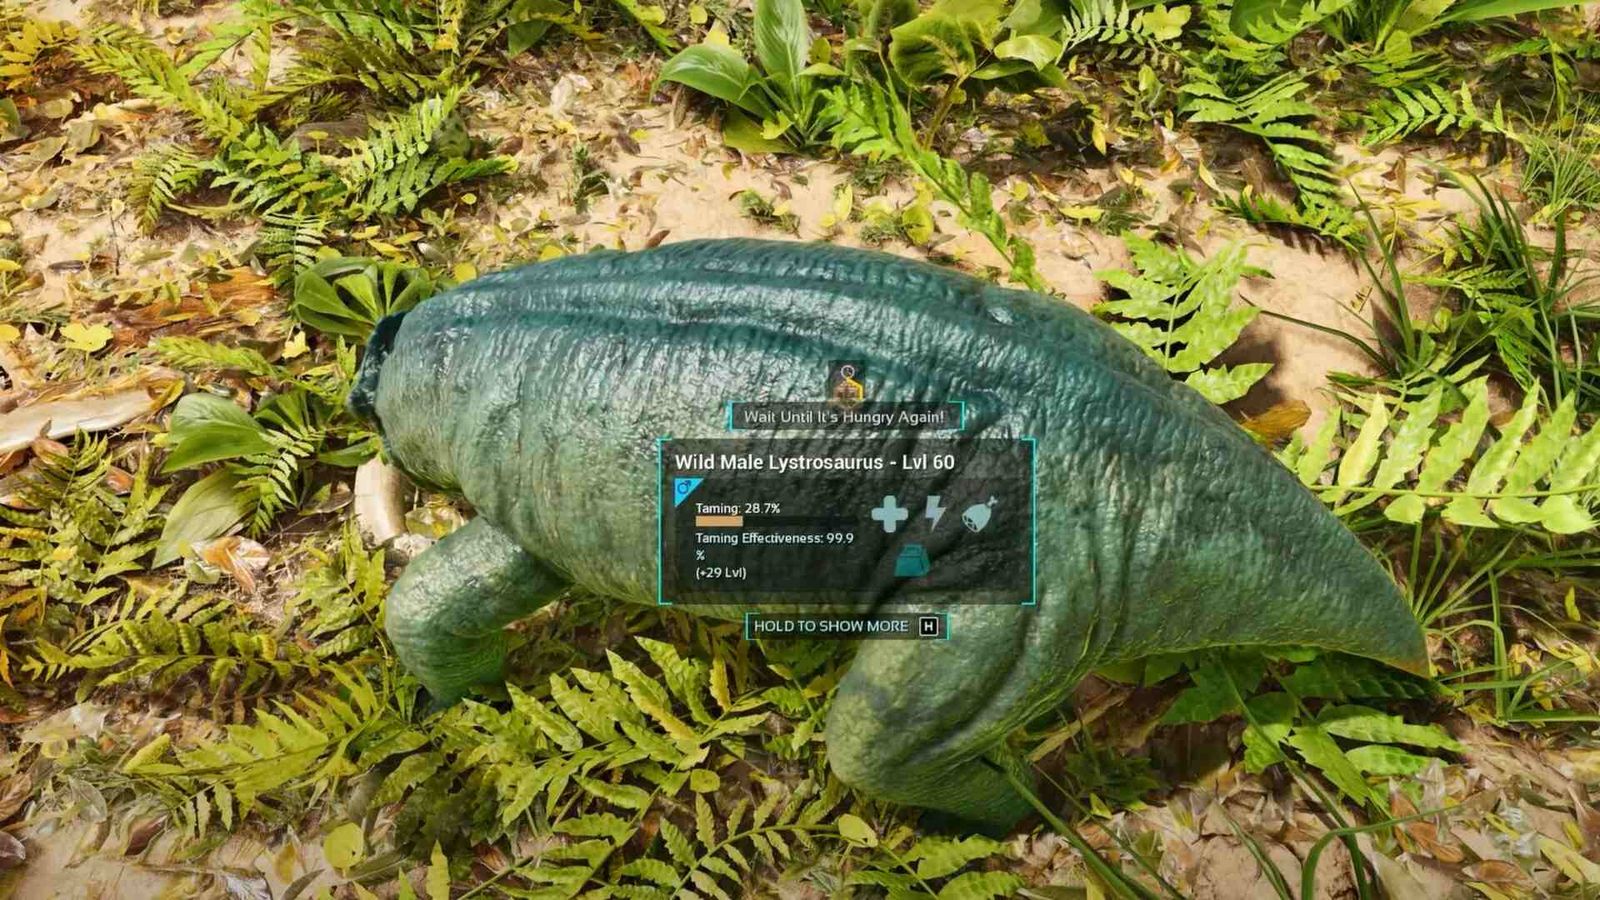 A screenshot from Ark: Survival Ascended showing a small blue dinosaur. There is a text box overlaid which reveals it is a Wild Male Lystrosaurus.